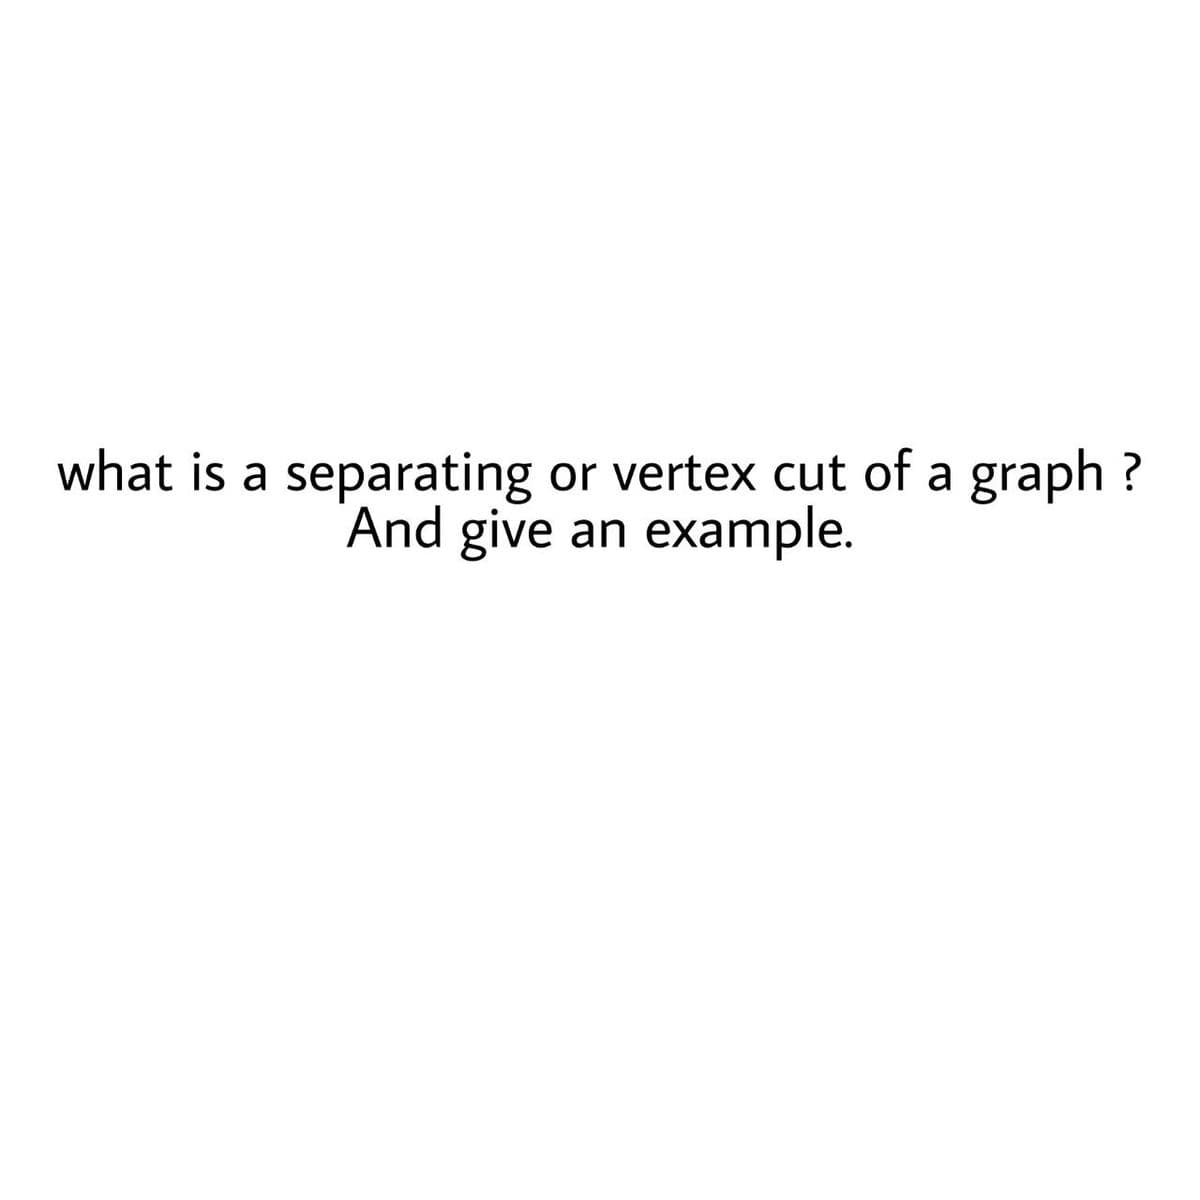 what is a separating
And give an
or vertex cut of a graph ?
example.
